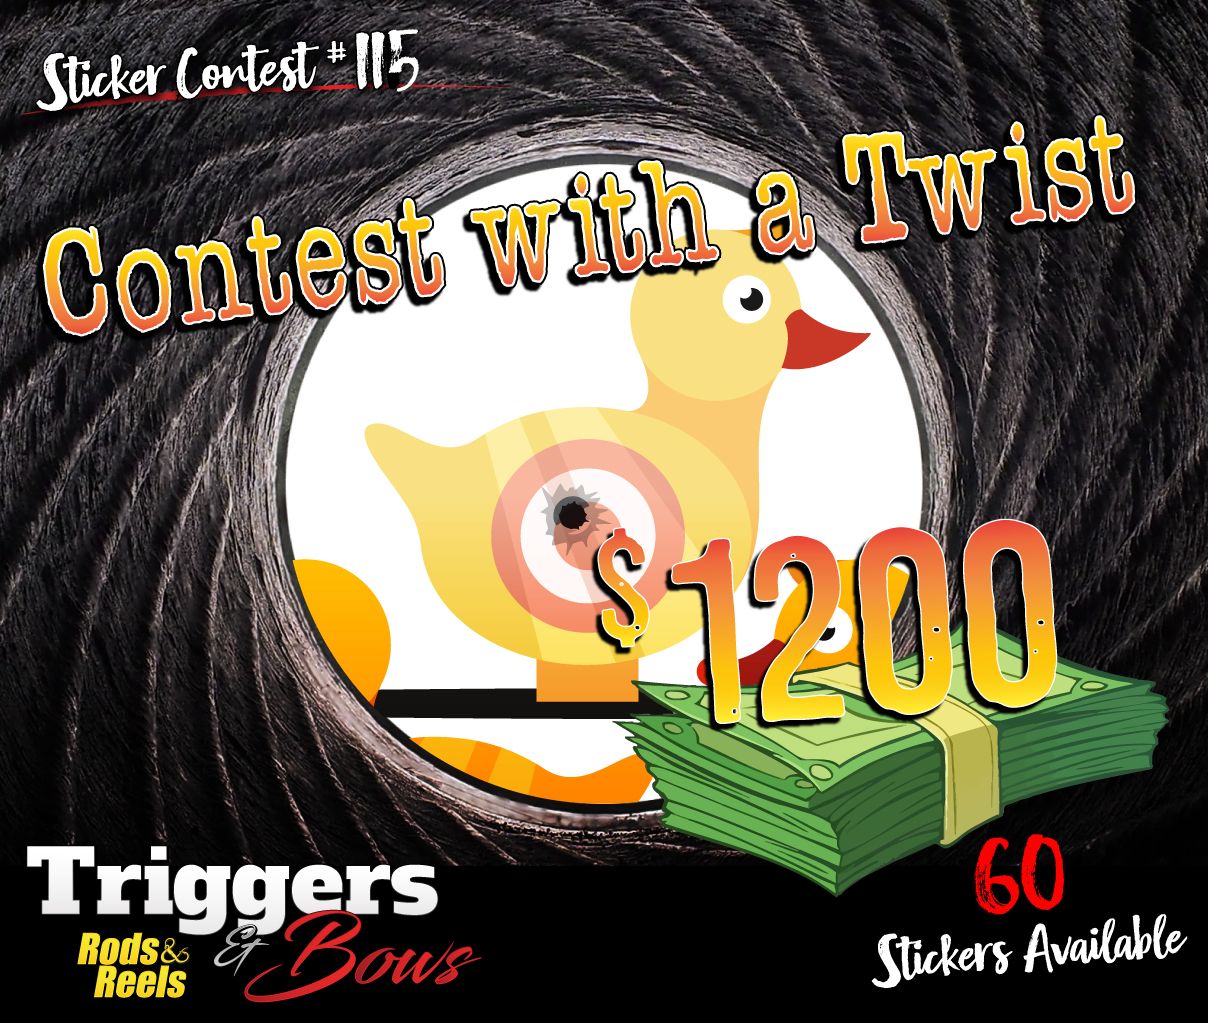 Sticker Contest #115 - Contest with a Twist $1200